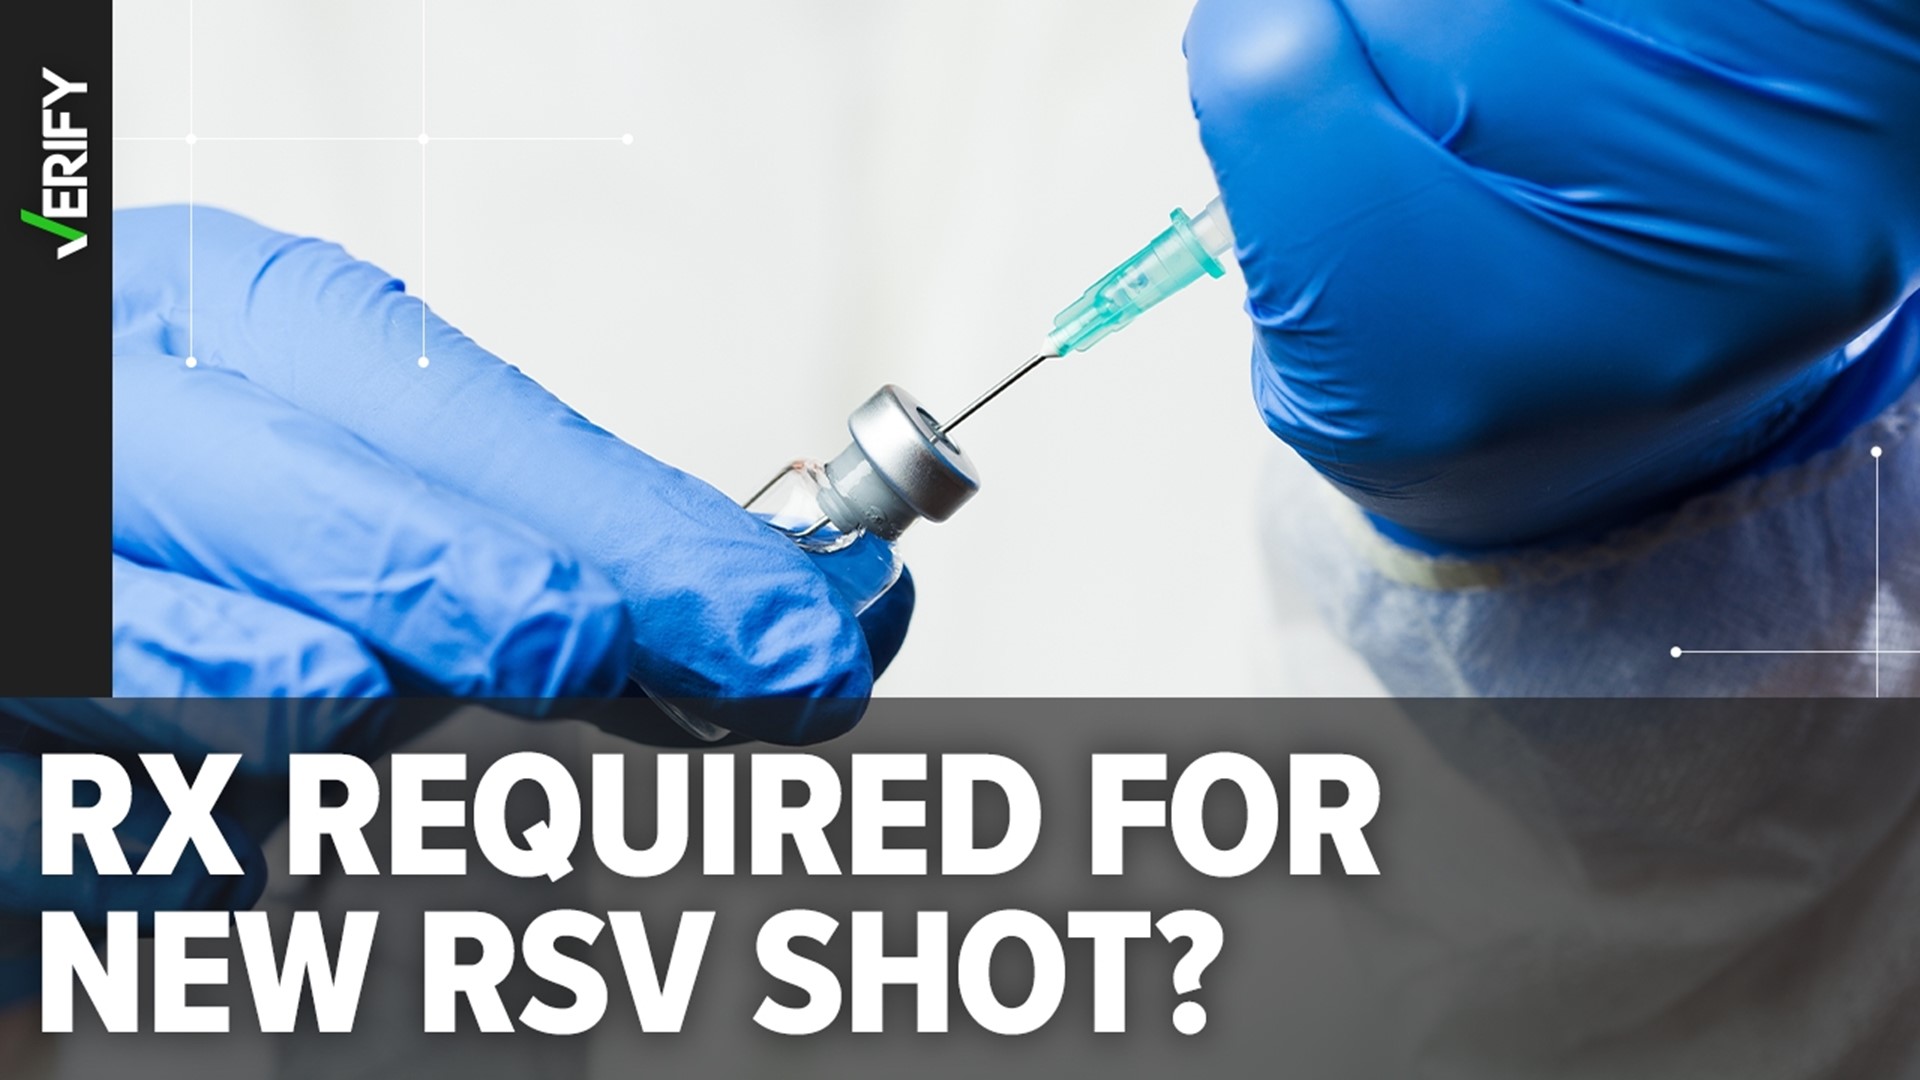 People living in Georgia, Iowa, Missouri, and Utah must get a doctor’s prescription before getting vaccinated for RSV.